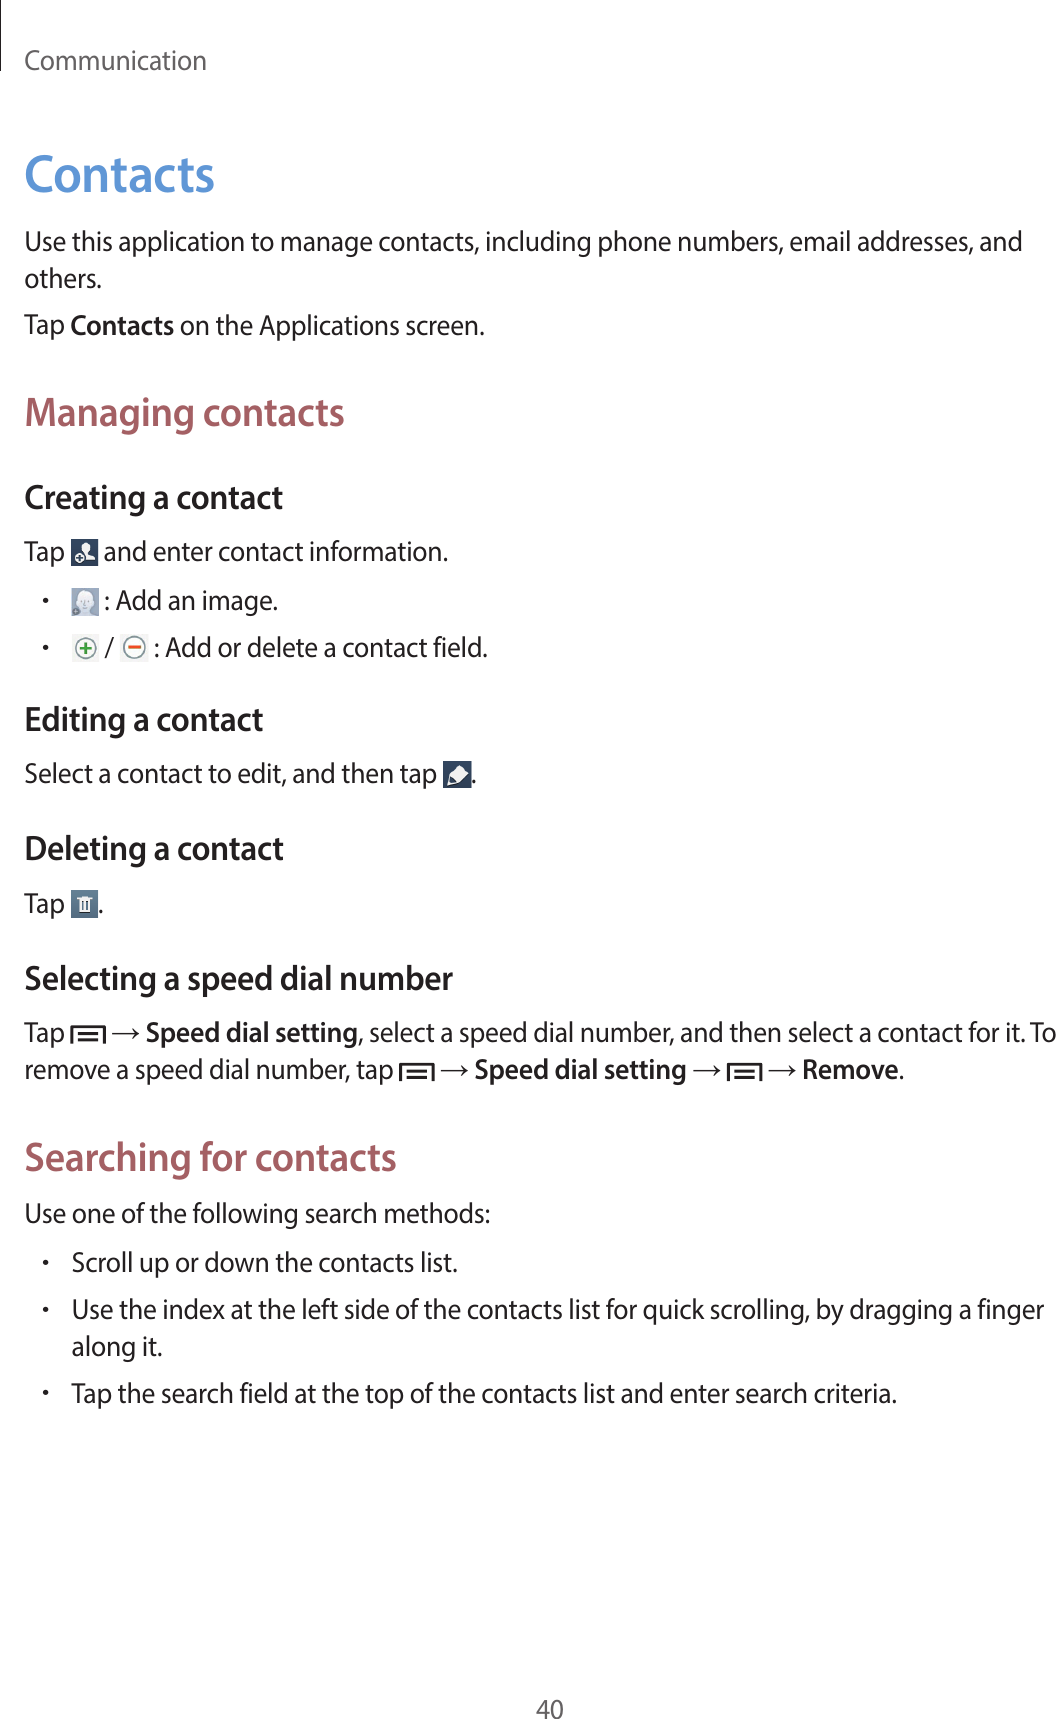 Communication40ContactsUse this application to manage contacts, including phone numbers, email addresses, and others.Tap Contacts on the Applications screen.Managing contactsCreating a contactTap   and enter contact information.• : Add an image.• /   : Add or delete a contact field.Editing a contactSelect a contact to edit, and then tap  .Deleting a contactTap  .Selecting a speed dial numberTap   → Speed dial setting, select a speed dial number, and then select a contact for it. To remove a speed dial number, tap   → Speed dial setting →   → Remove.Searching for contactsUse one of the following search methods:•Scroll up or down the contacts list.•Use the index at the left side of the contacts list for quick scrolling, by dragging a finger along it.•Tap the search field at the top of the contacts list and enter search criteria.